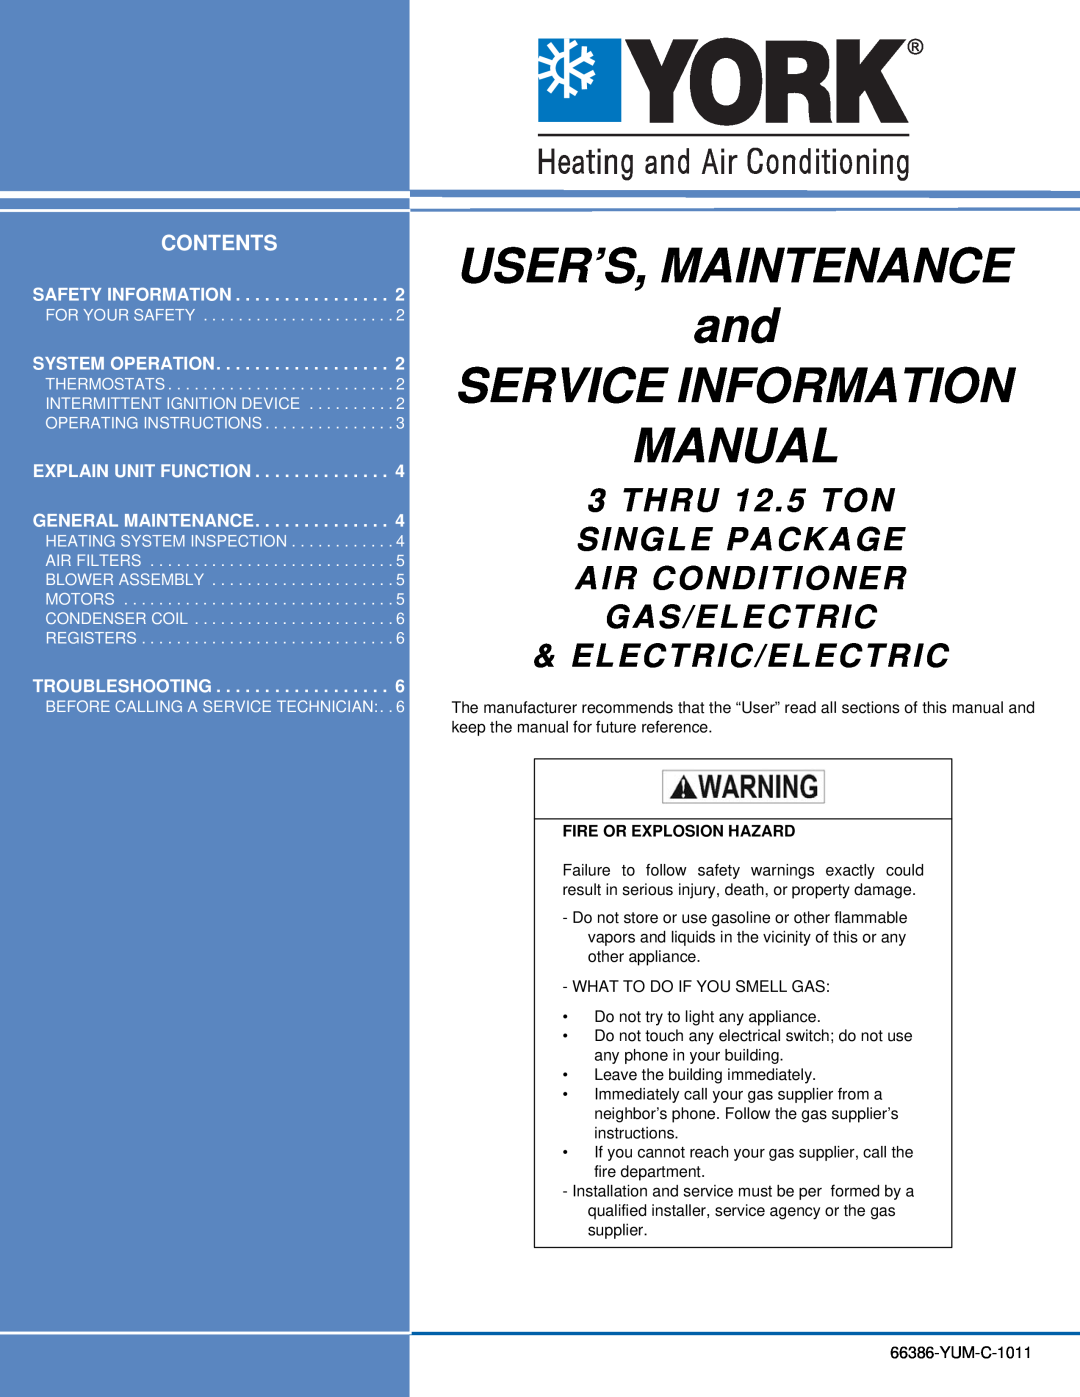 York 66386-YUM-C-1011 manual Fire Or Explosion Hazard, USER’S, MAINTENANCE and SERVICE INFORMATION, Manual, Contents 